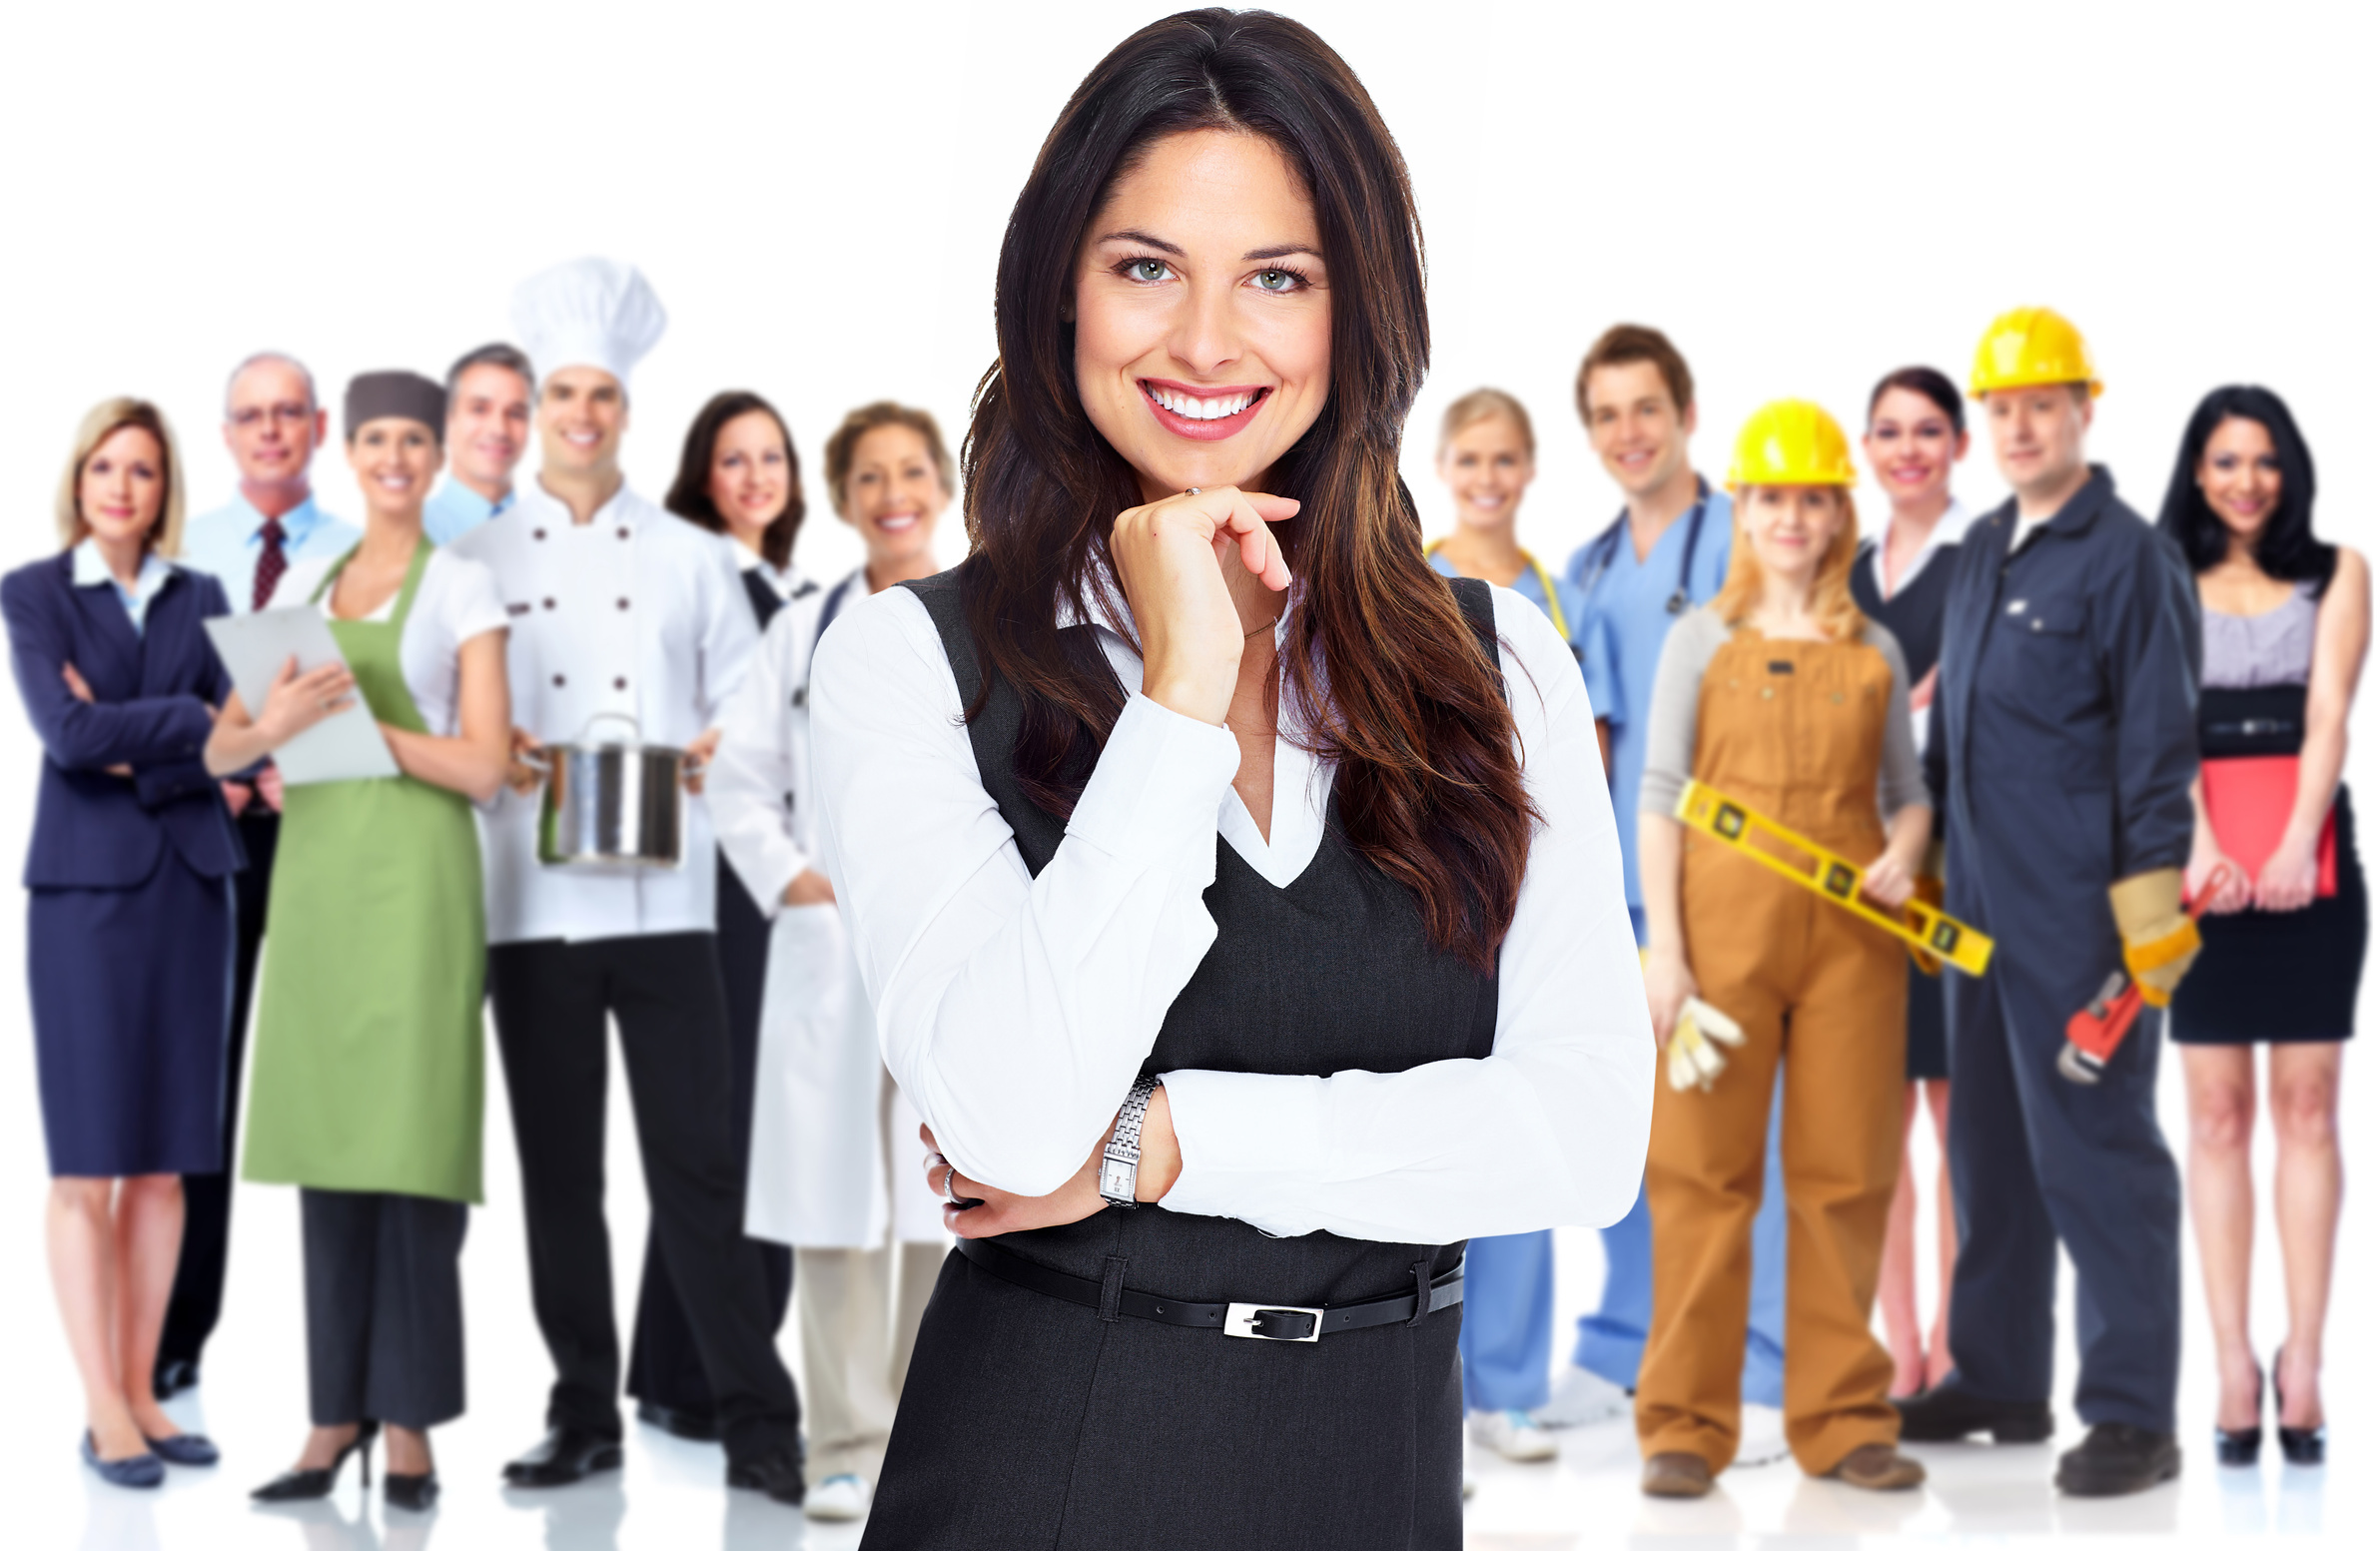 Business woman and group of workers people. Isolated over white background.